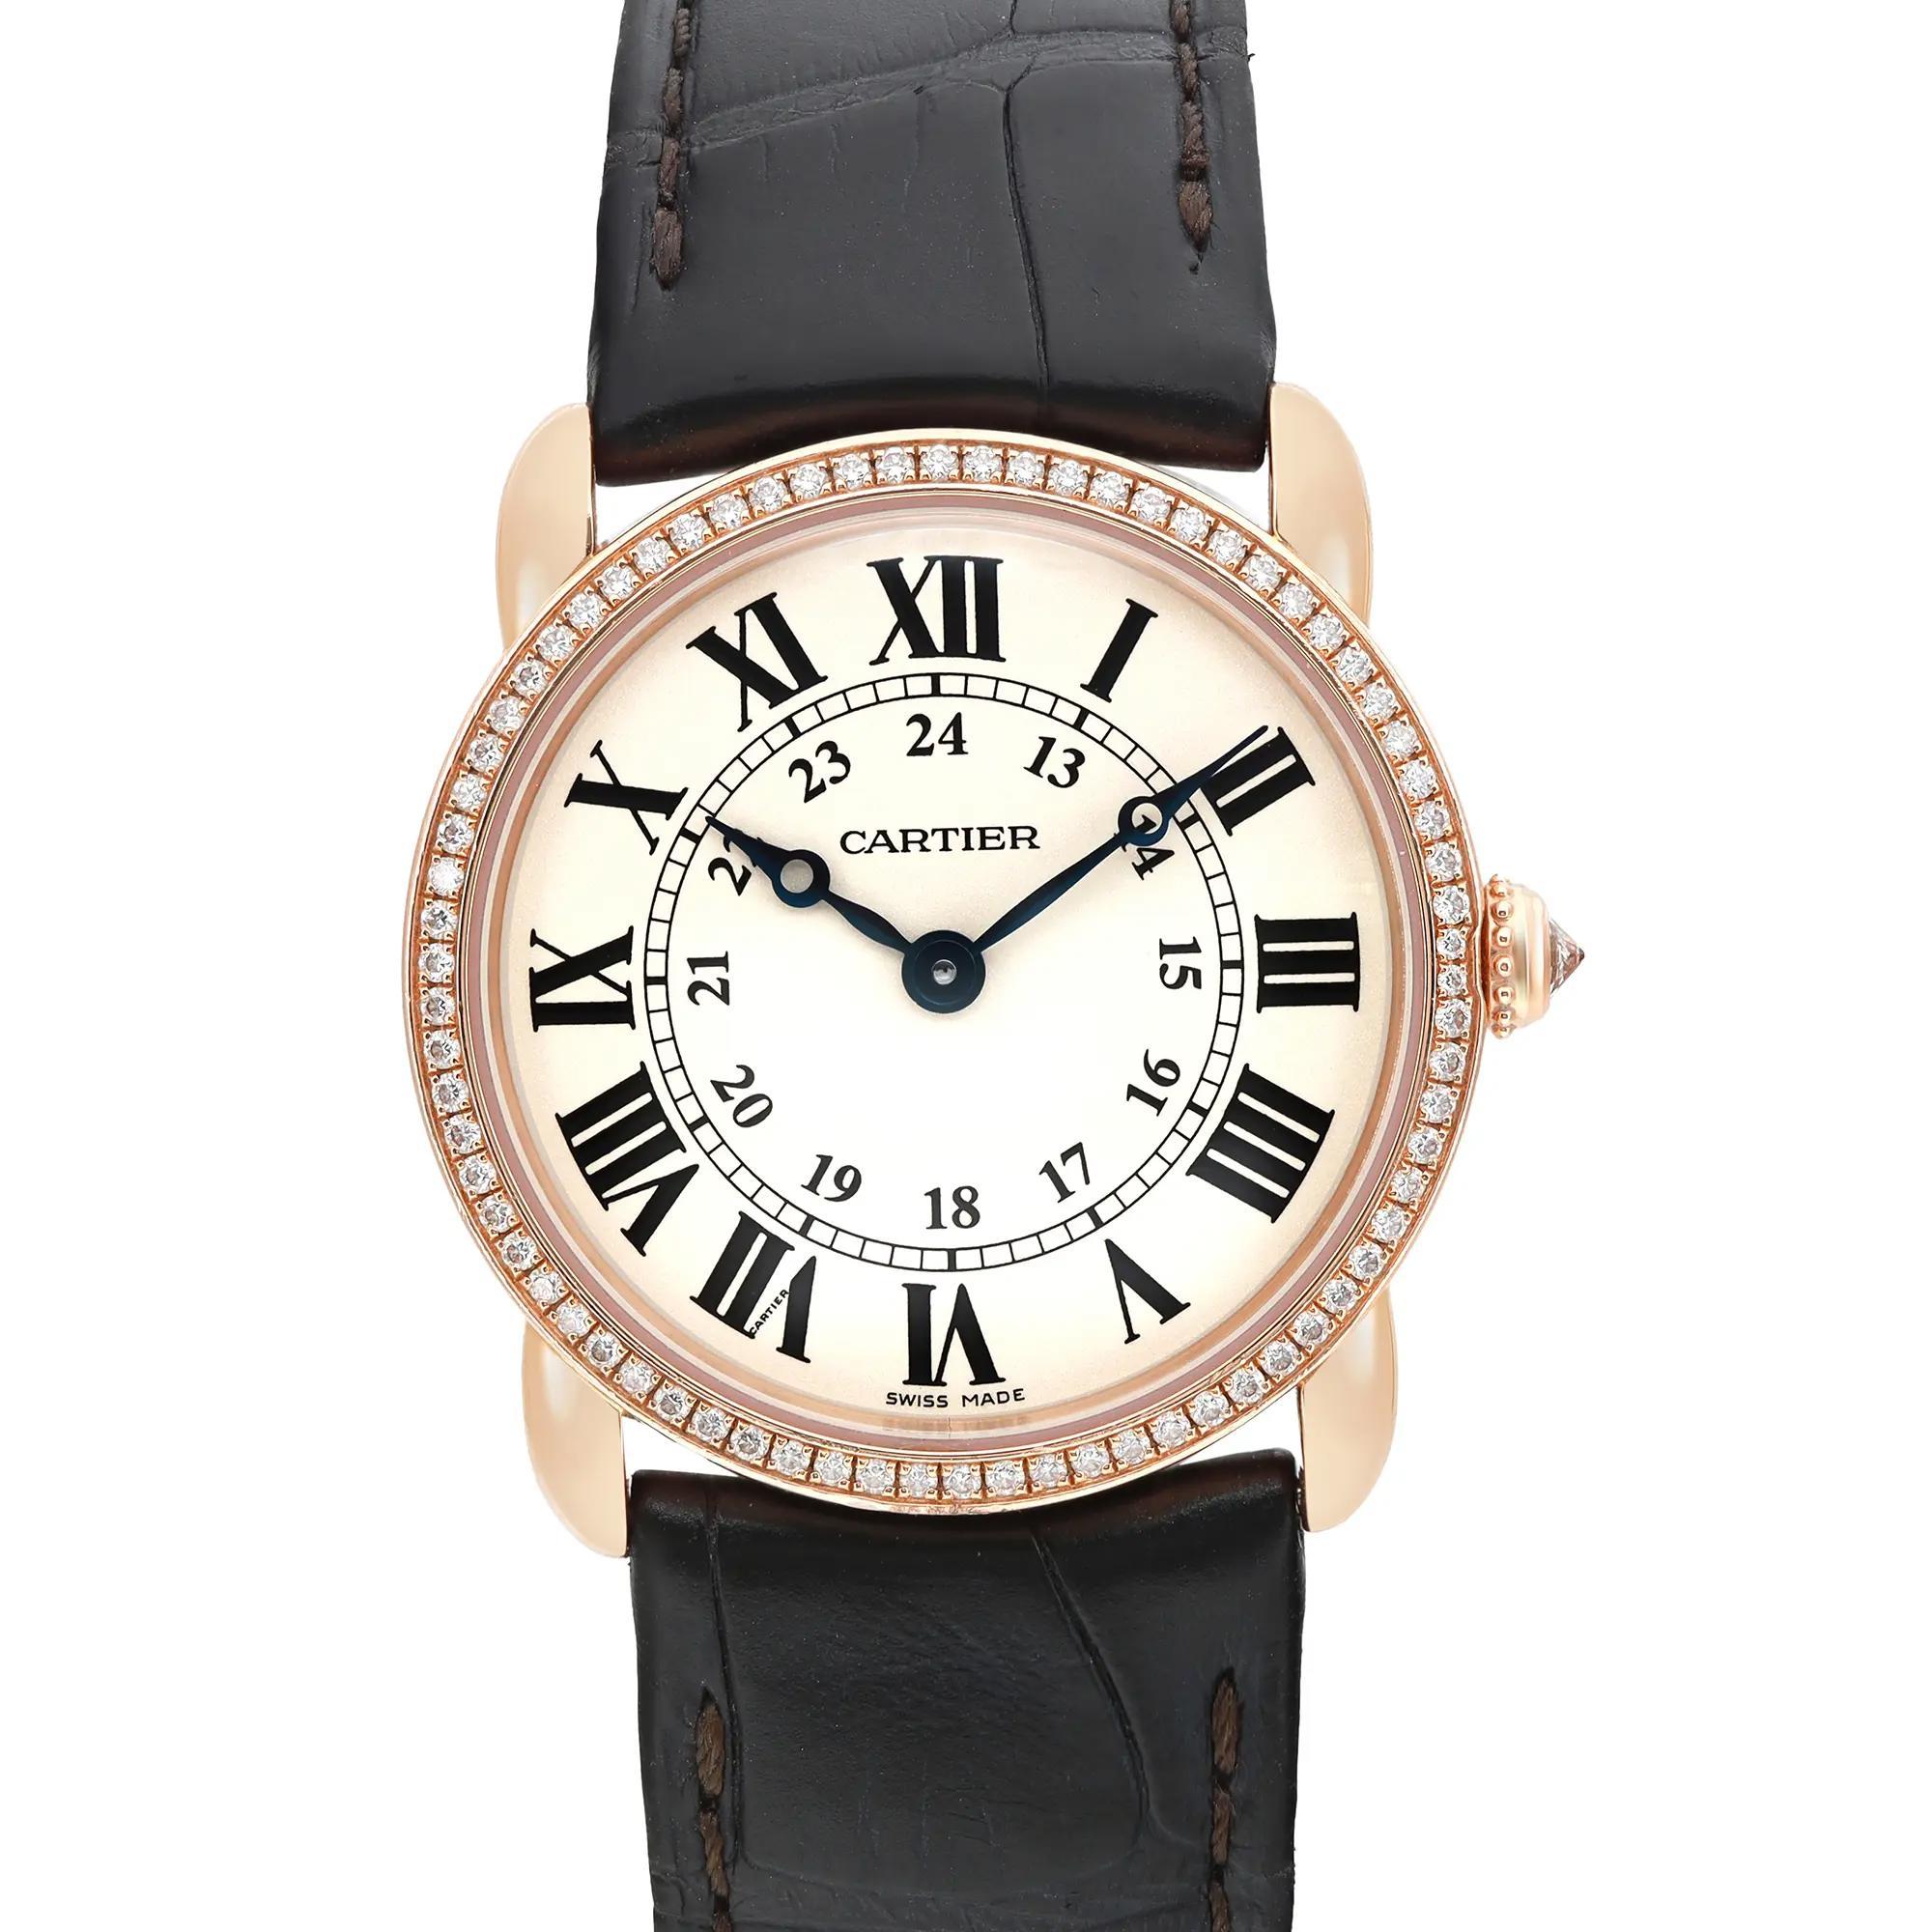 Pre-owned in good condition. The band shows signs of wear. Comes with an original box but no papers.

Cartier Ronde Louis WR000351 Details
General Information
Brand: Cartier
Type: Wristwatch
Department: Women
Model Number: WR000351
Model: Cartier